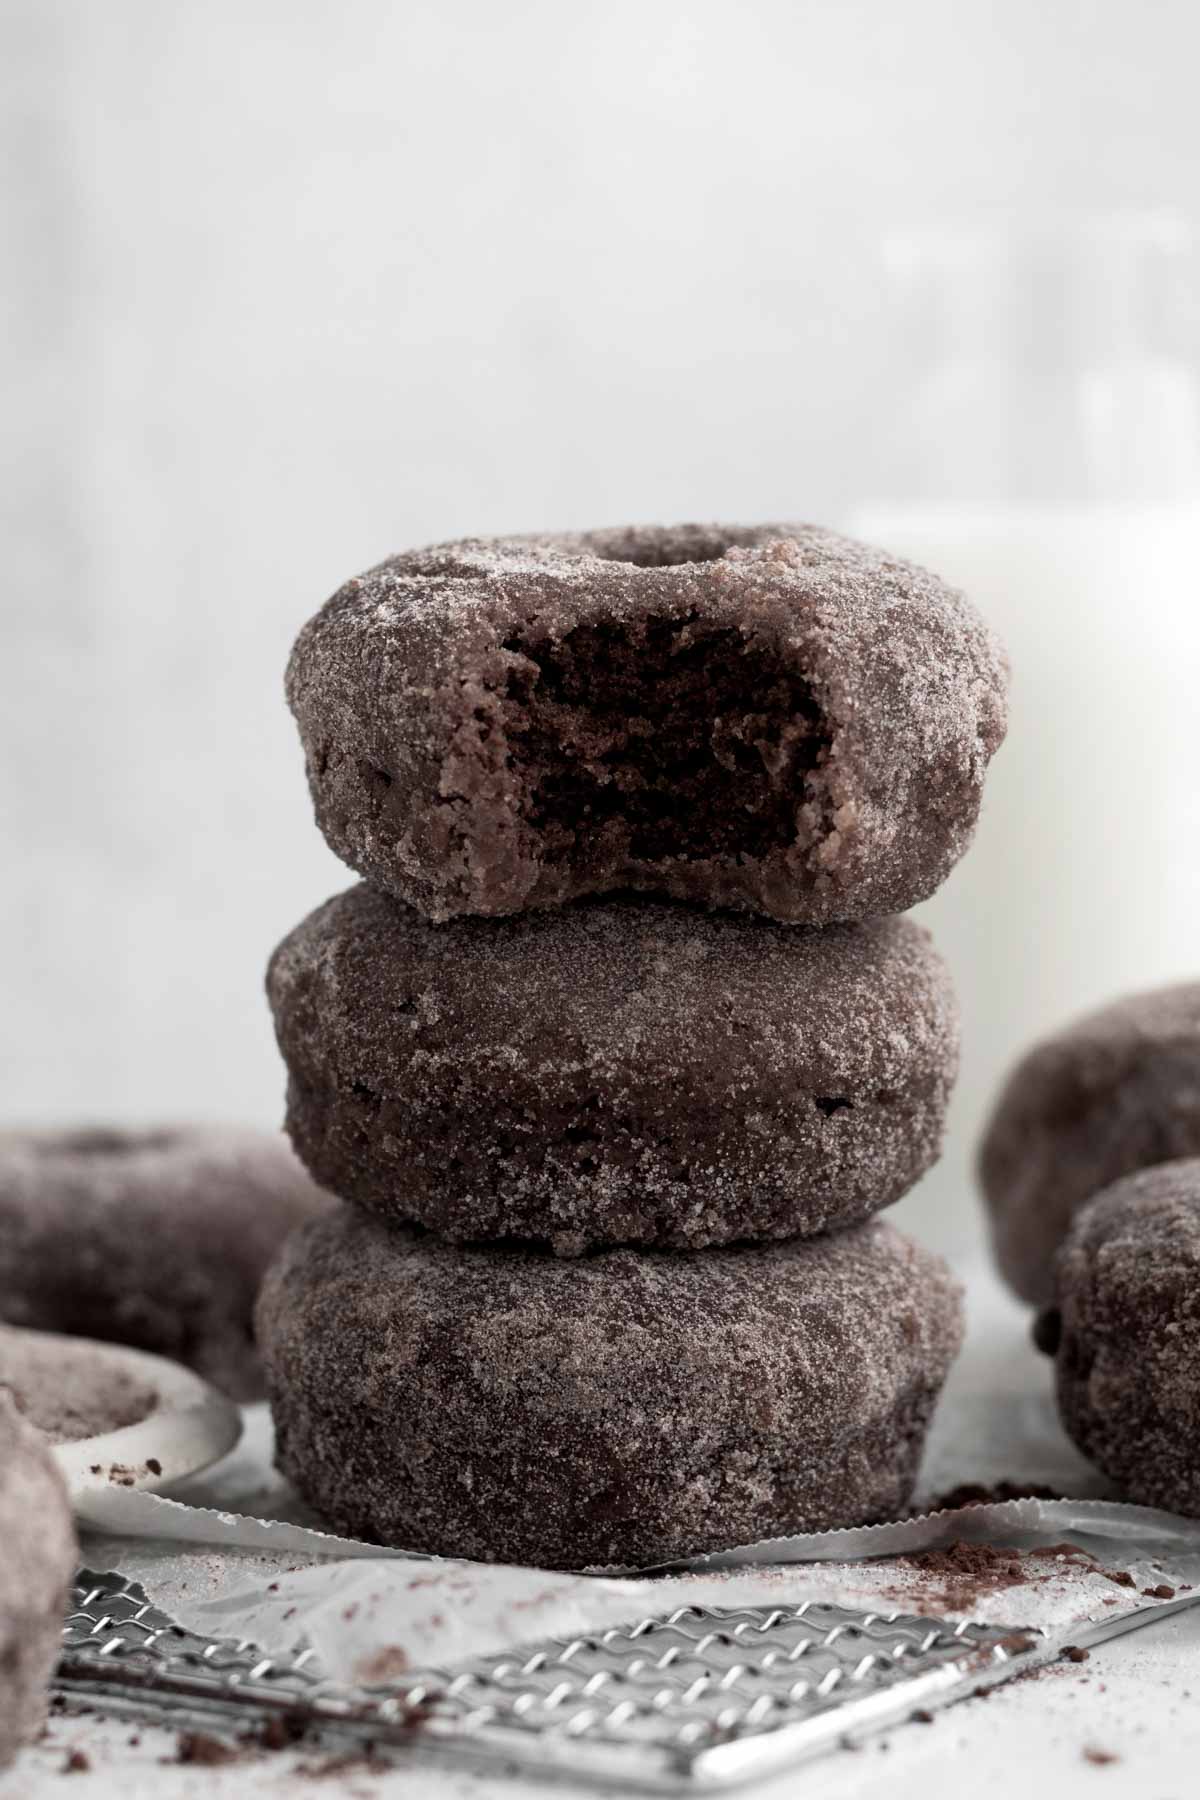 A tower of three Chocolate Sugared Donuts awaits your hands.